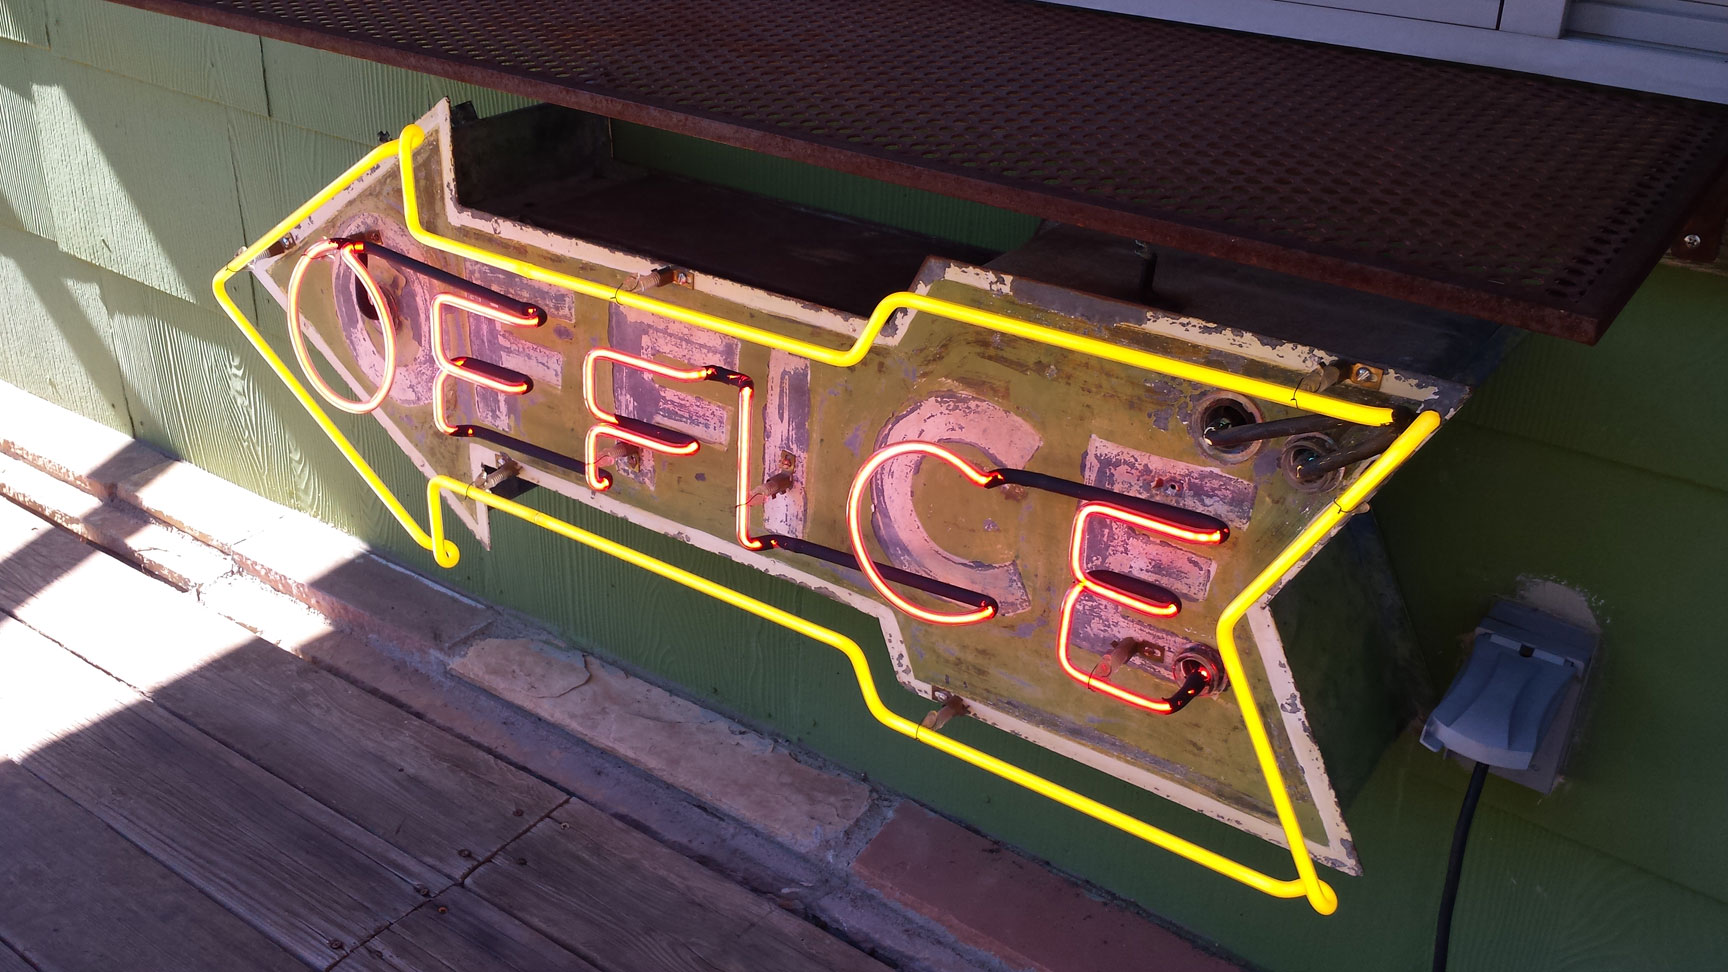 Loved the neon office sign on the community porch!